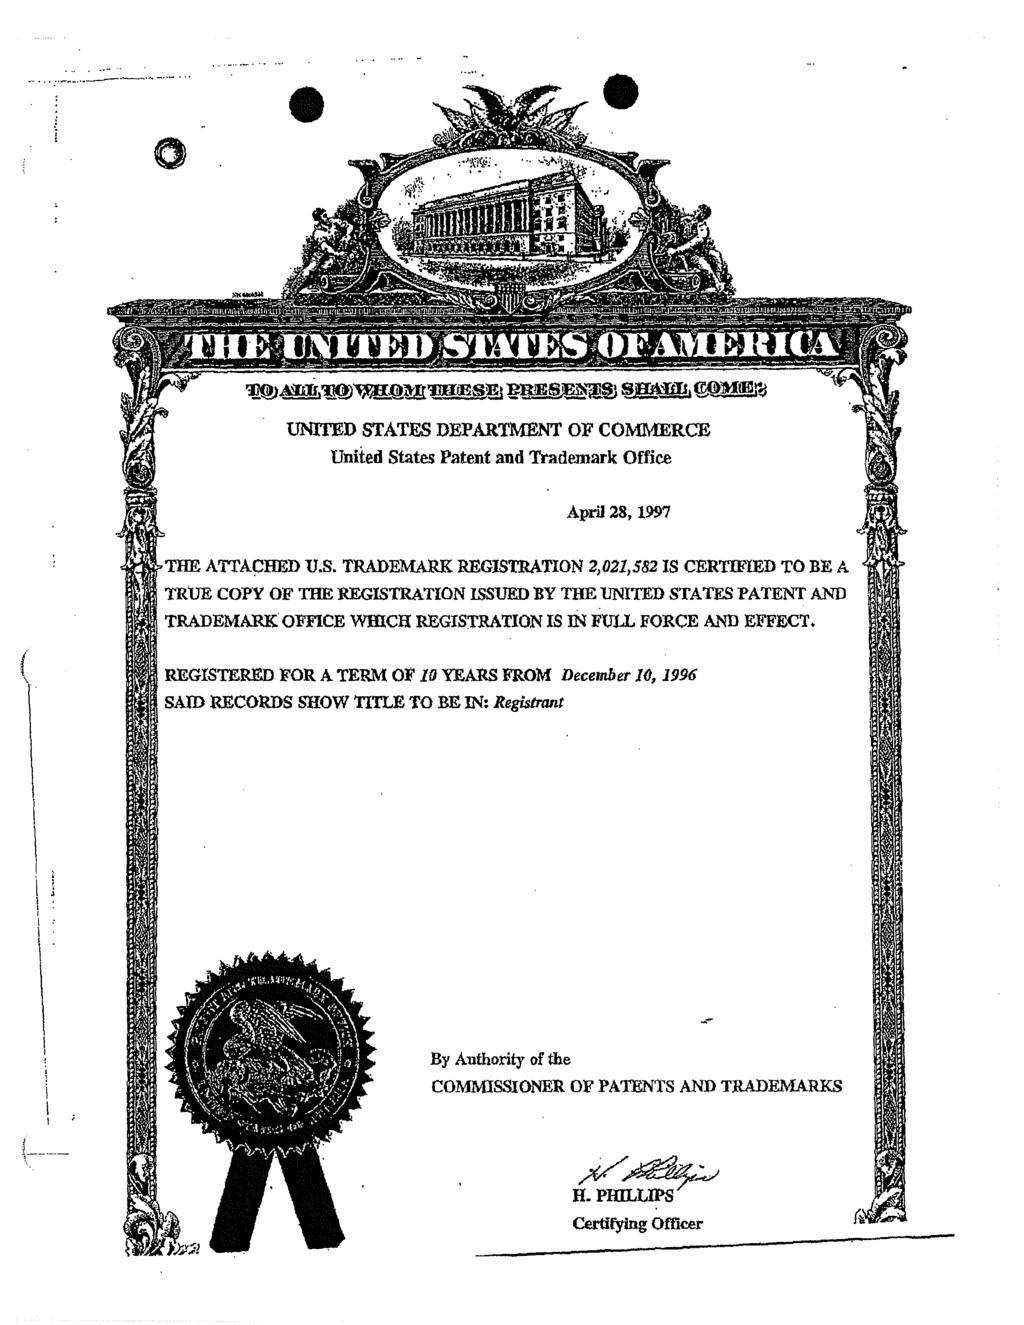 Case 2:16-cv-01061 Document 1-6 Filed 02/16/16 Page 7 of 13 Page ID #:66 +.Cl6t~' UUNZTED STATES DEPARTMENT OF COMMERCE United States Patent and Trademark Office JI ~.